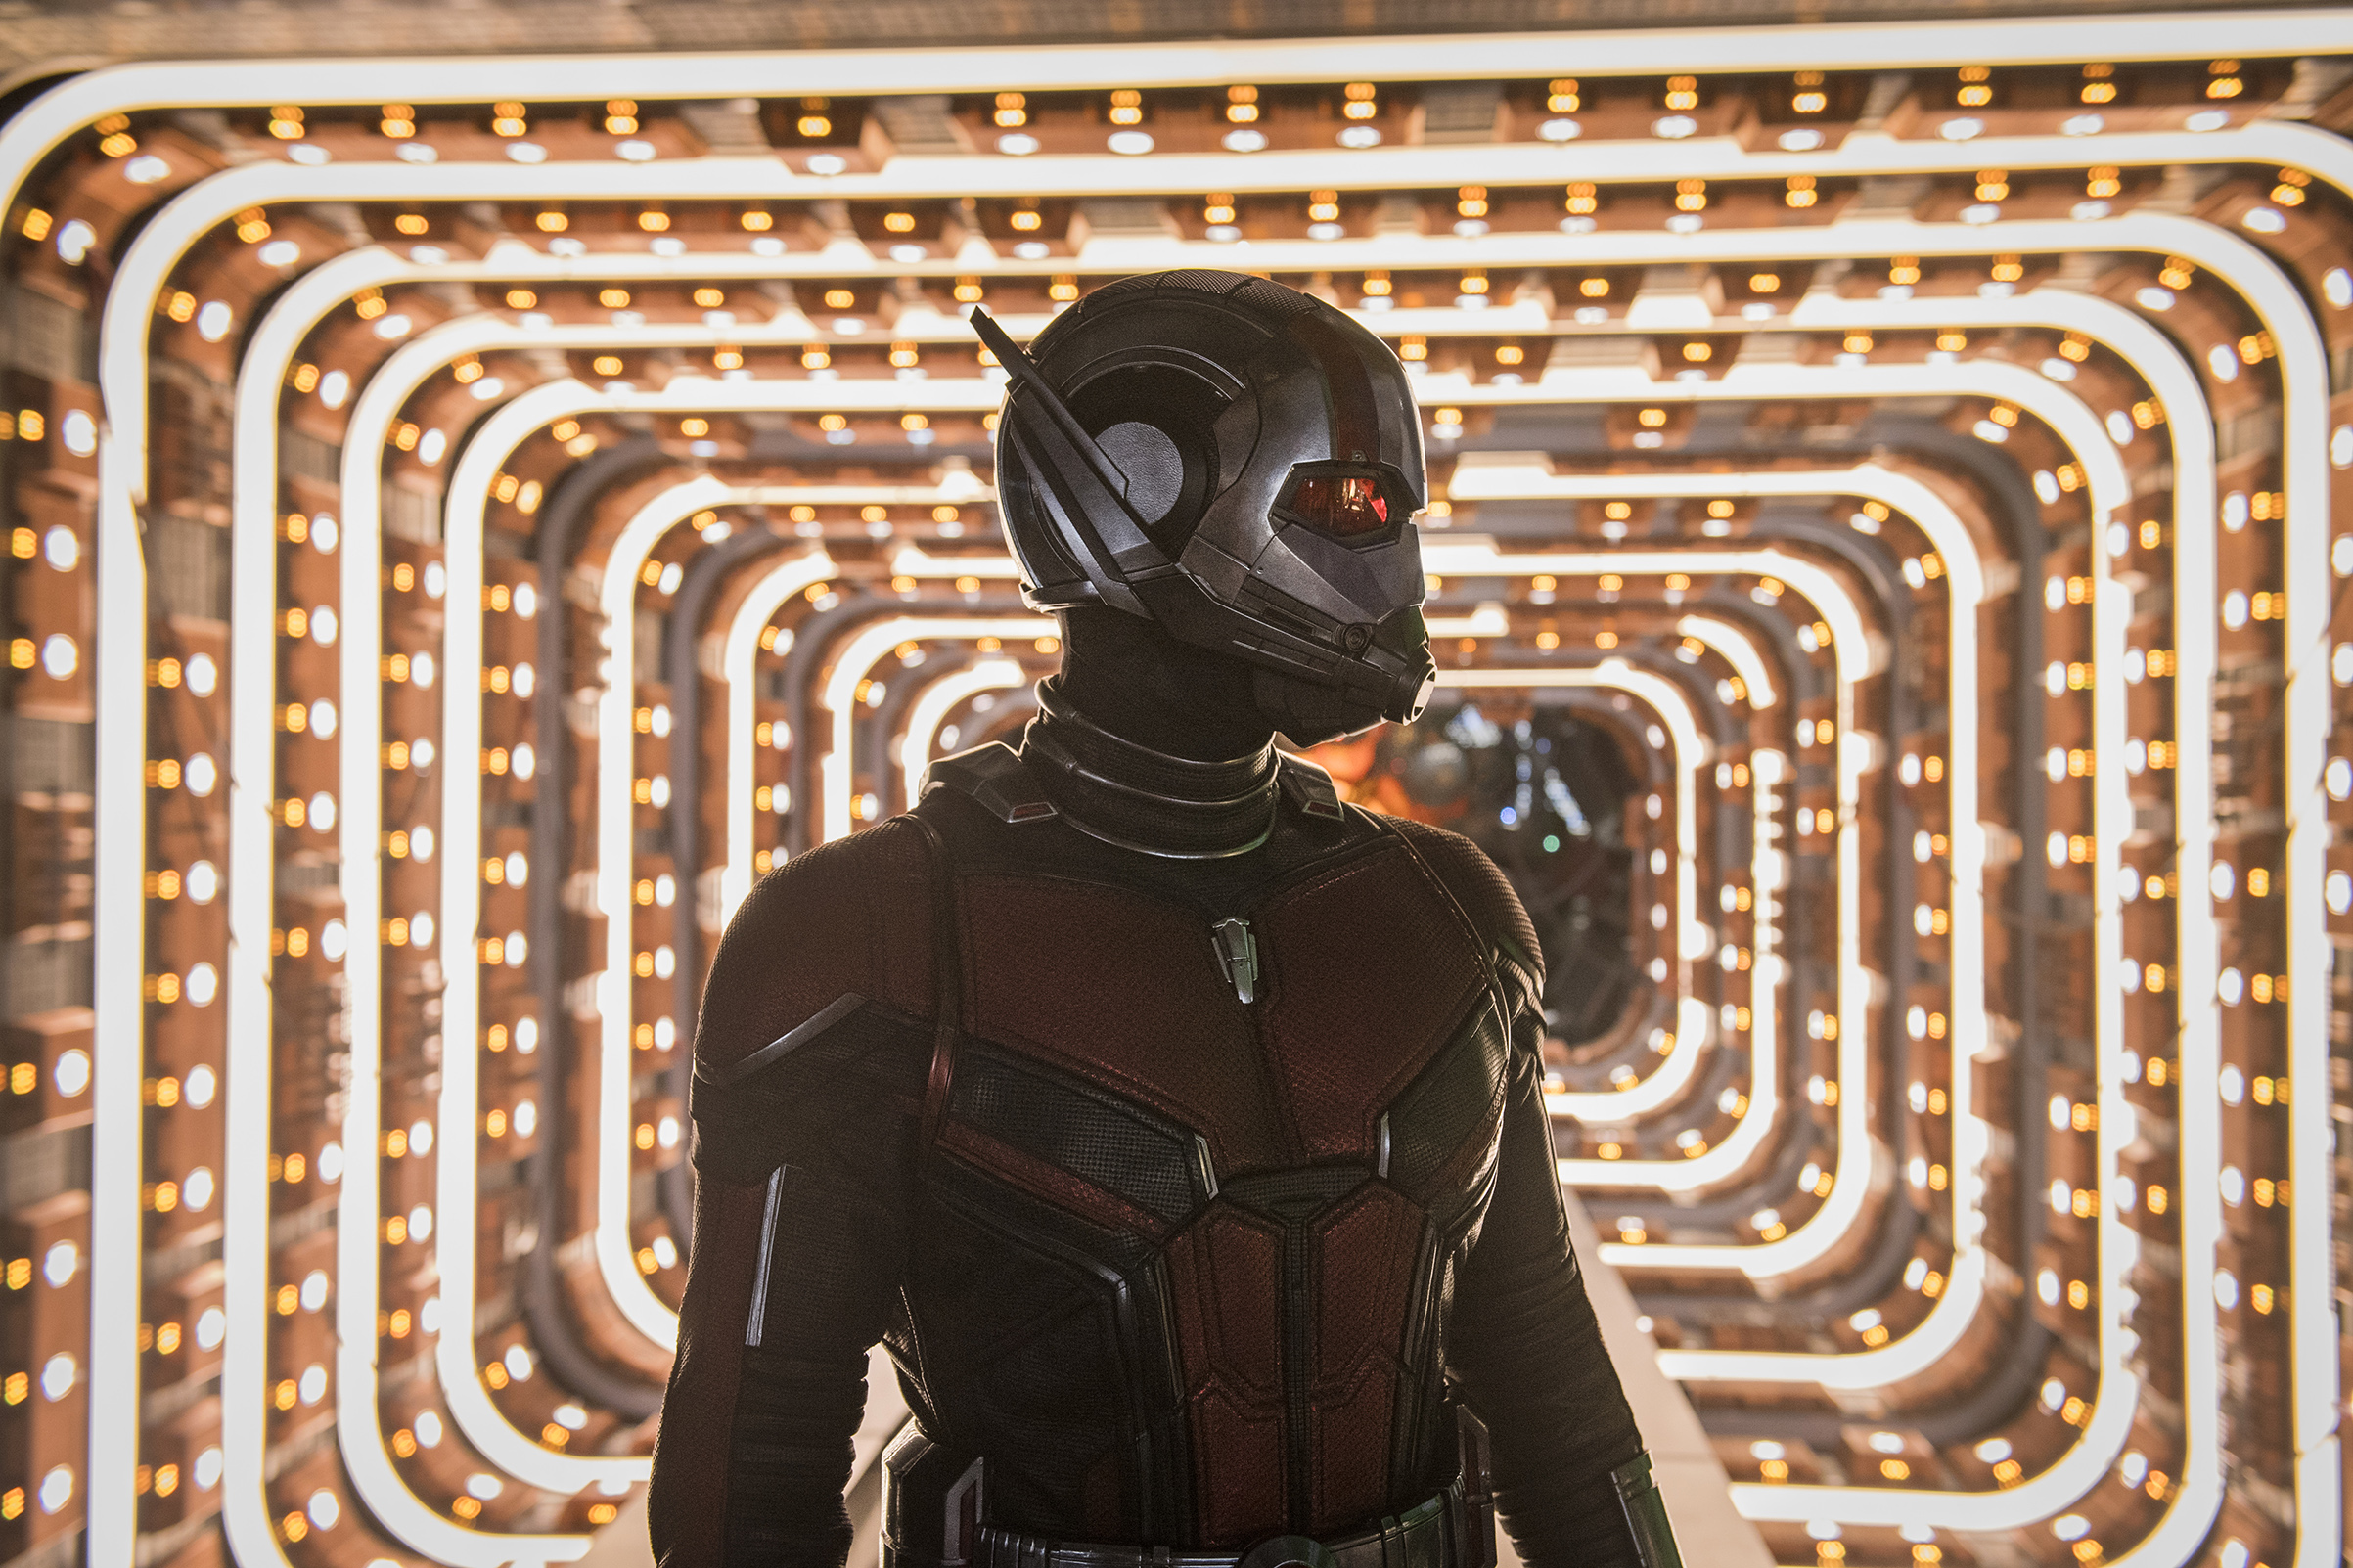 Paul Rudd in “Ant-Man and the Wasp”. (Marvel Studios)